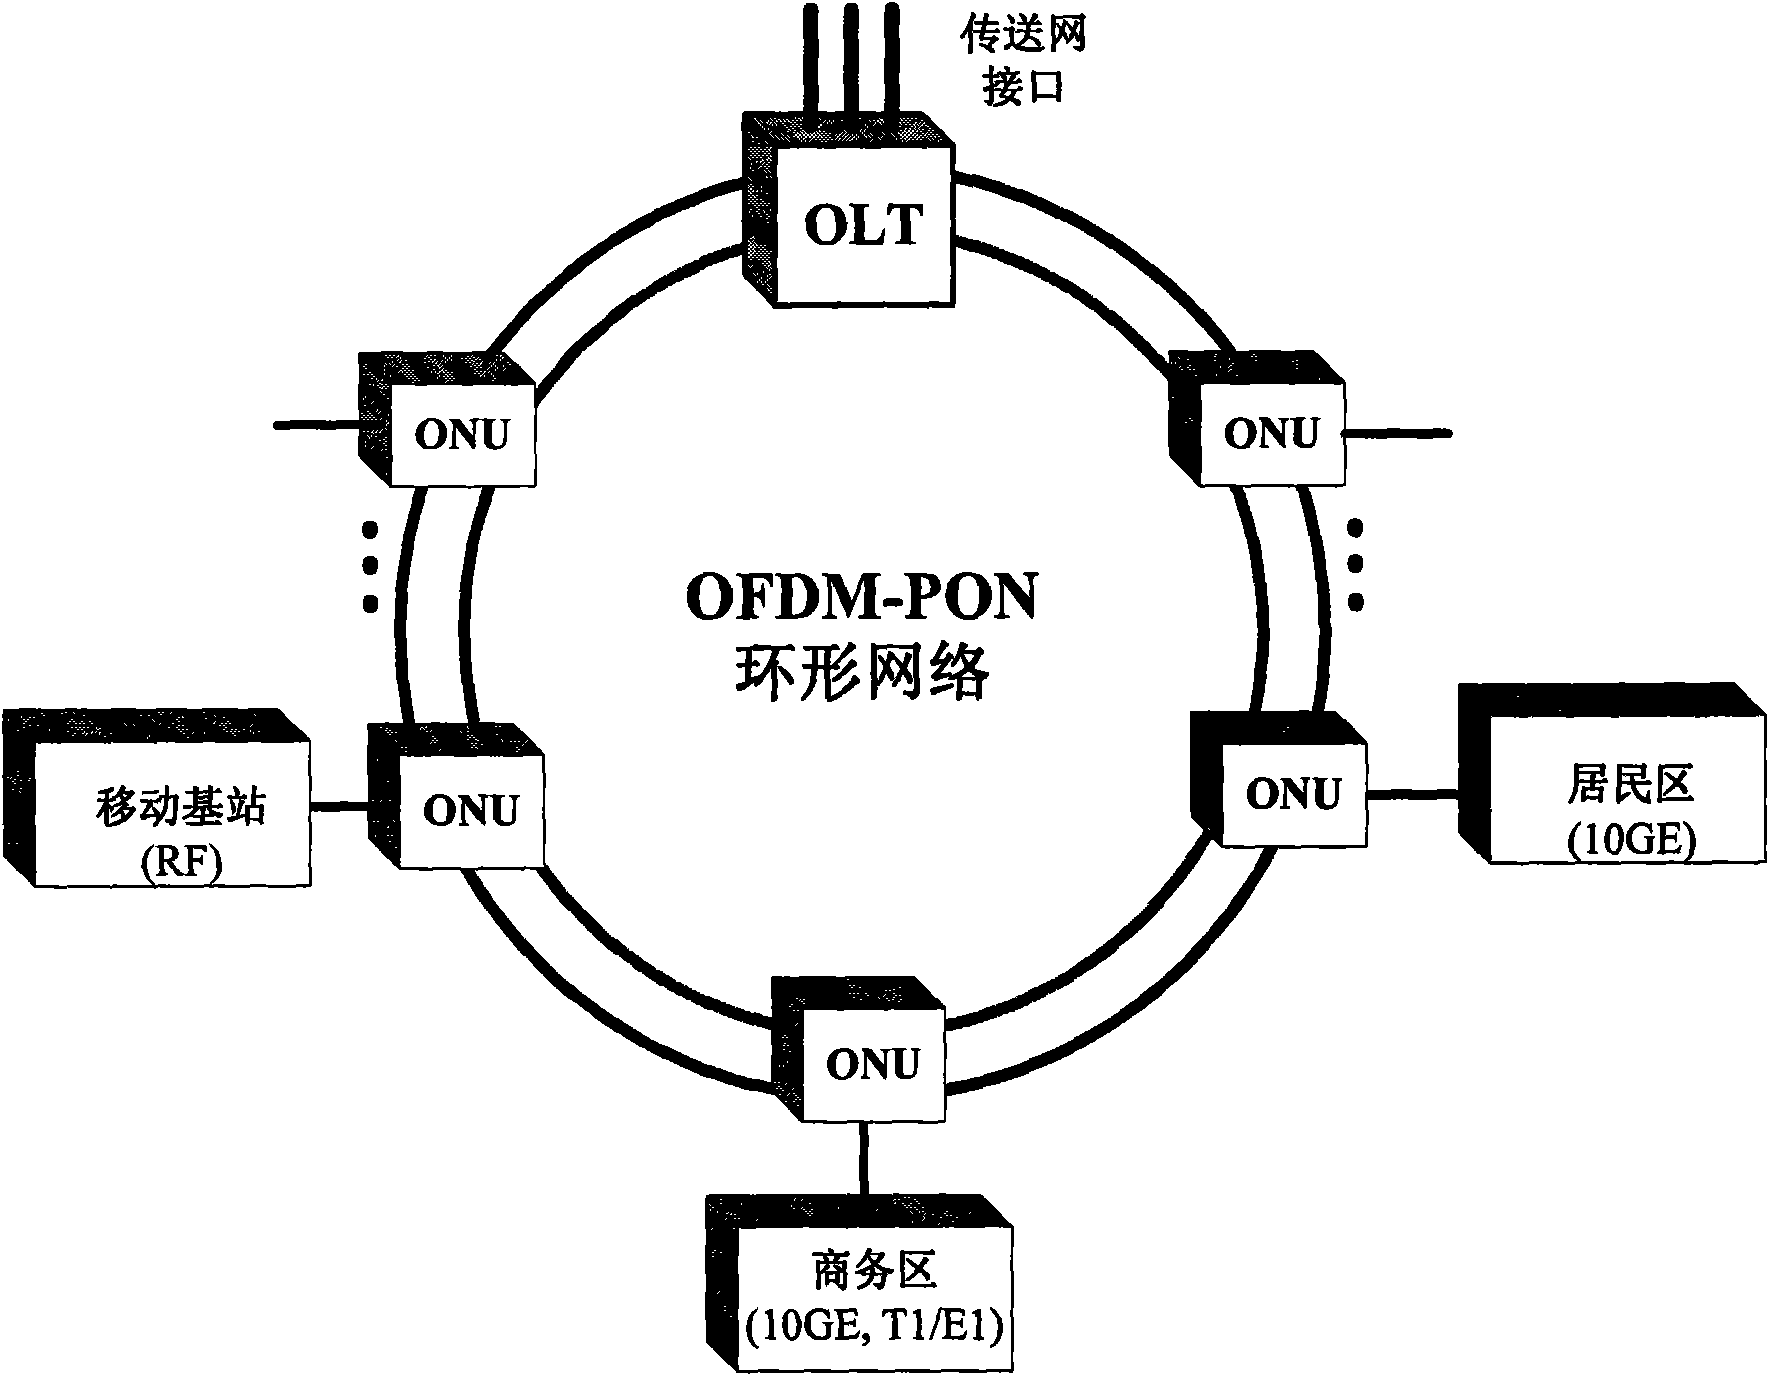 Orthogonal frequency division multiplexing passive optical network